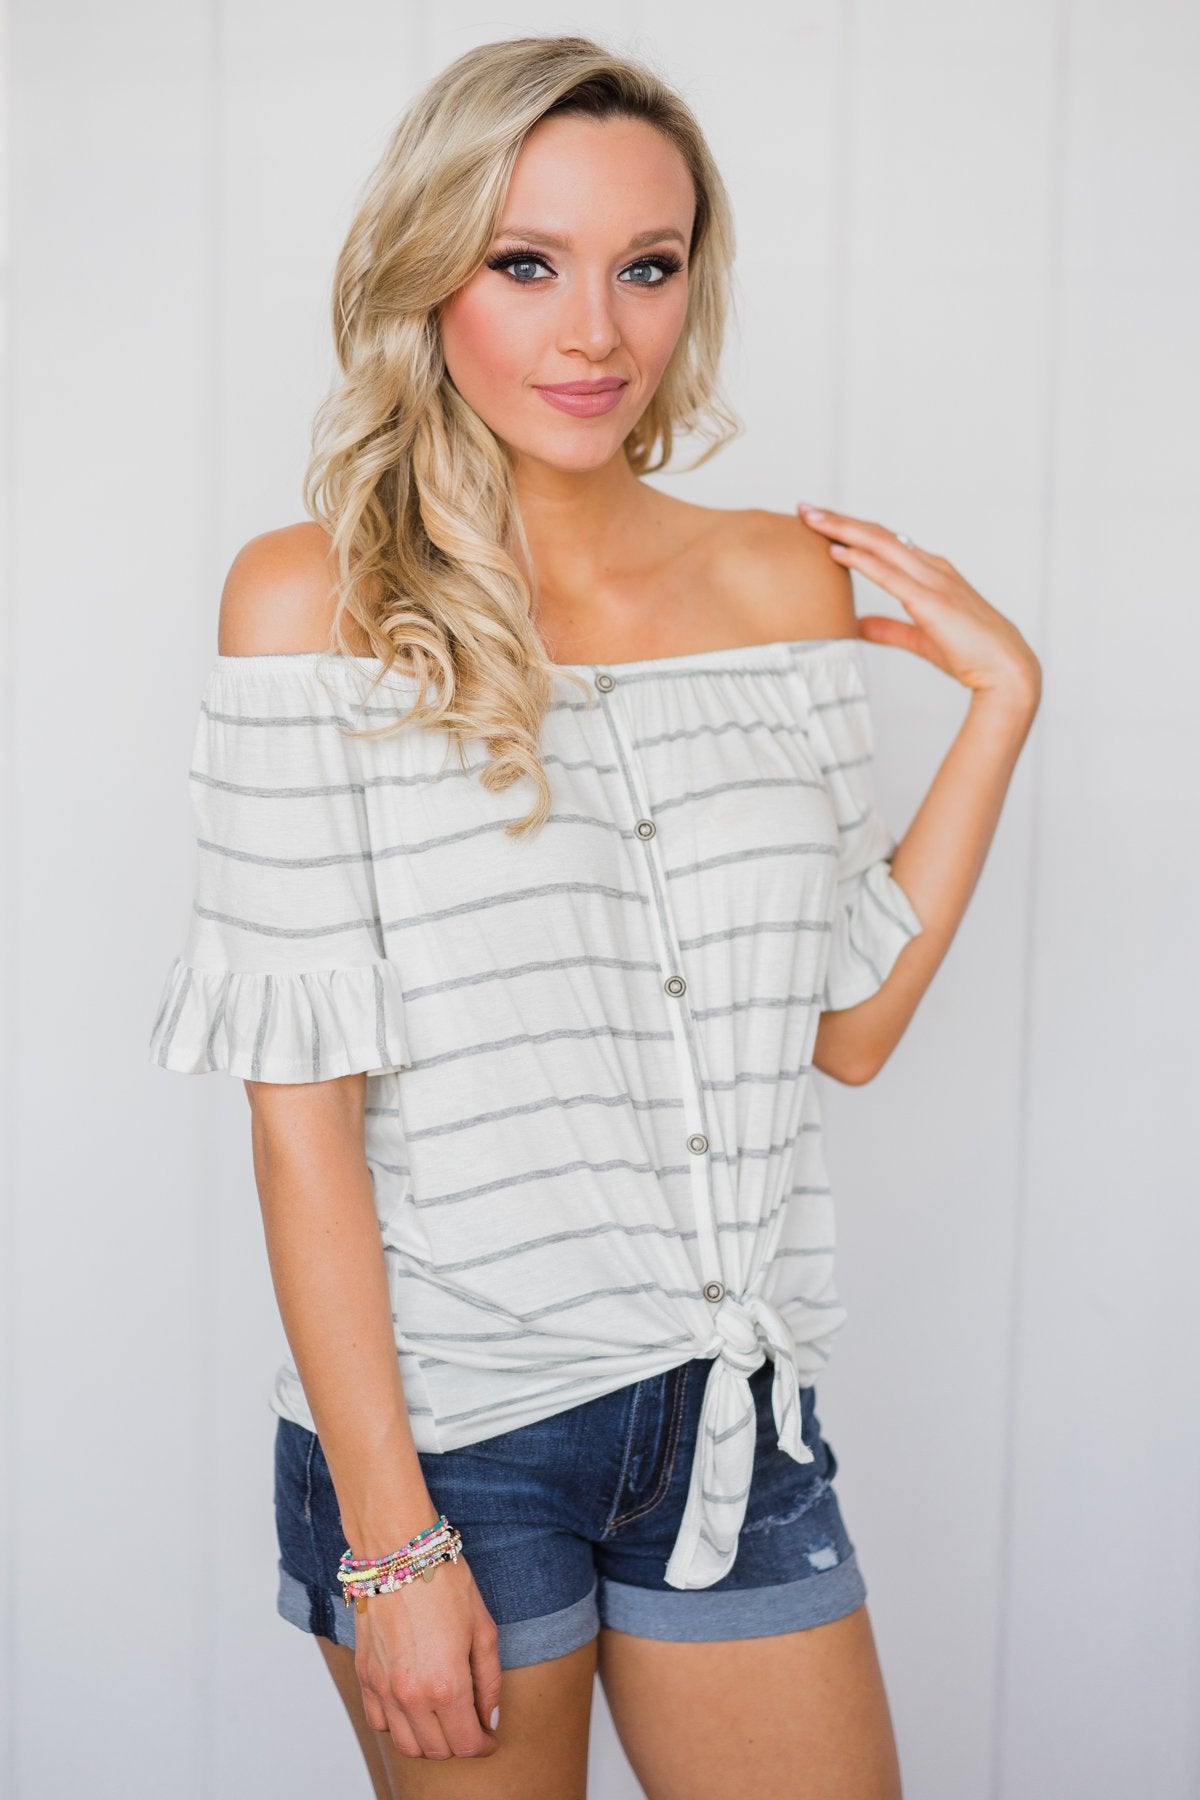 Tied Up in Summer Striped Top